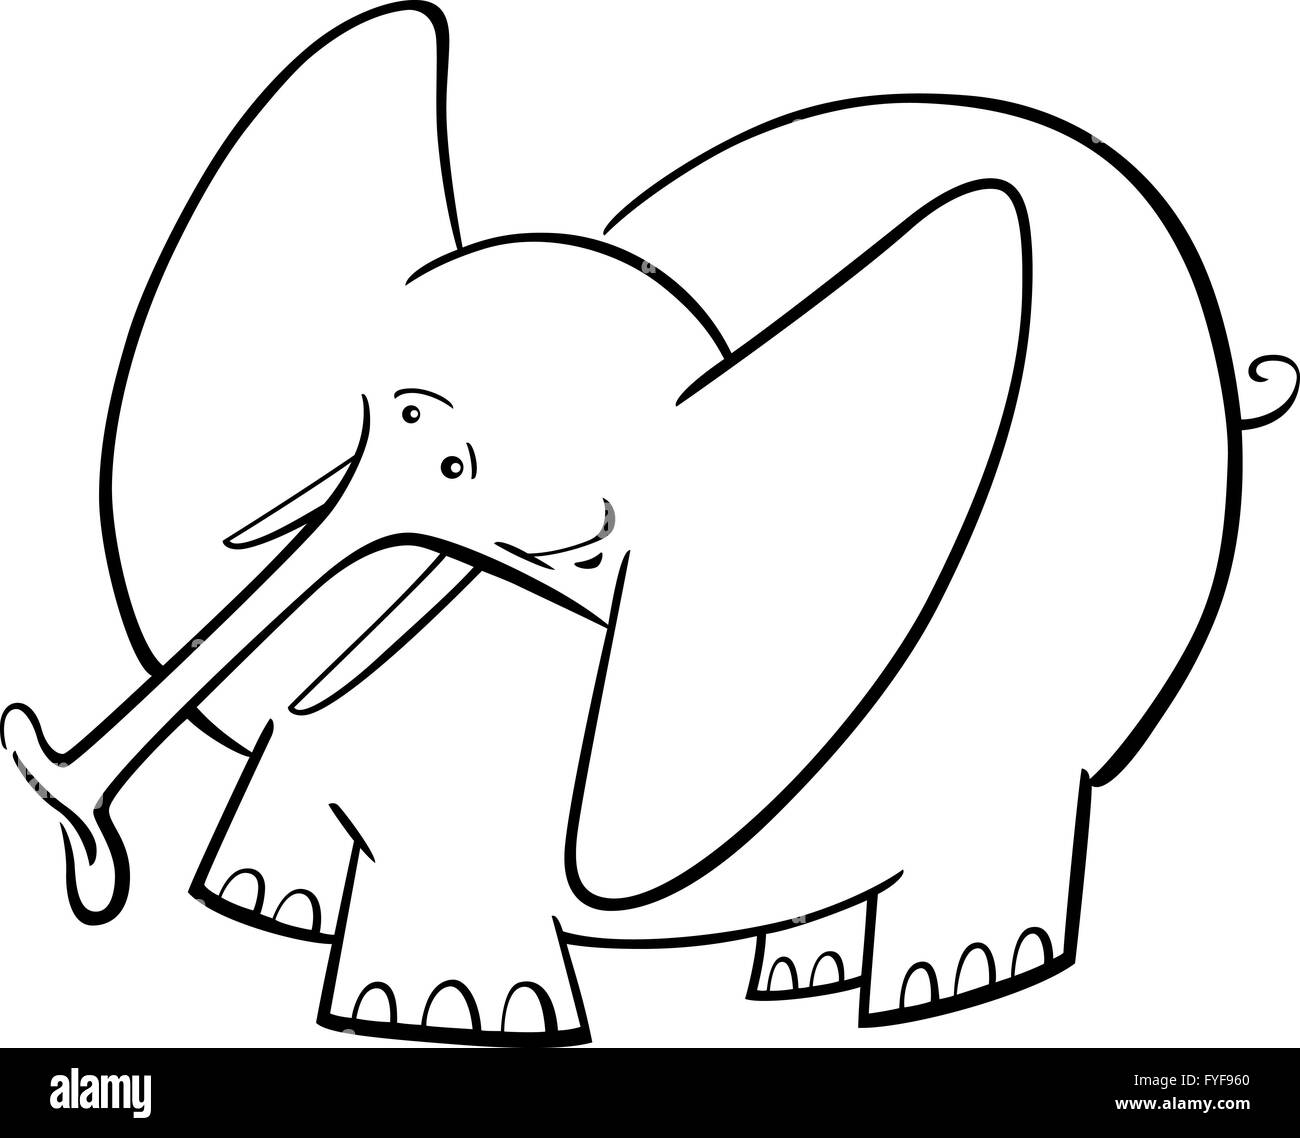 Elephant Cartoon for coloring book Stock Photo